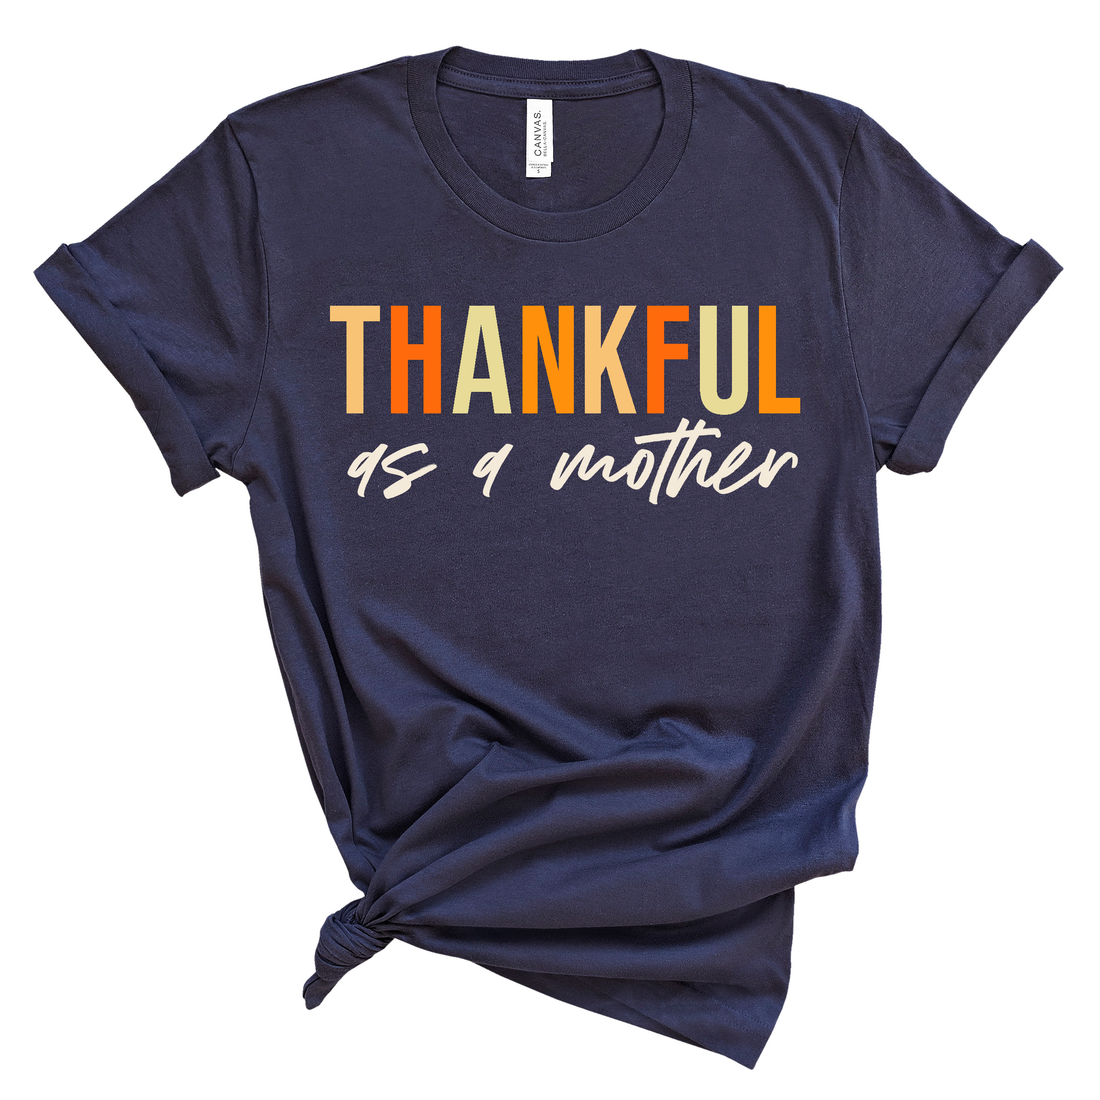 Thankful as a Mother Tee [FINAL SALE]